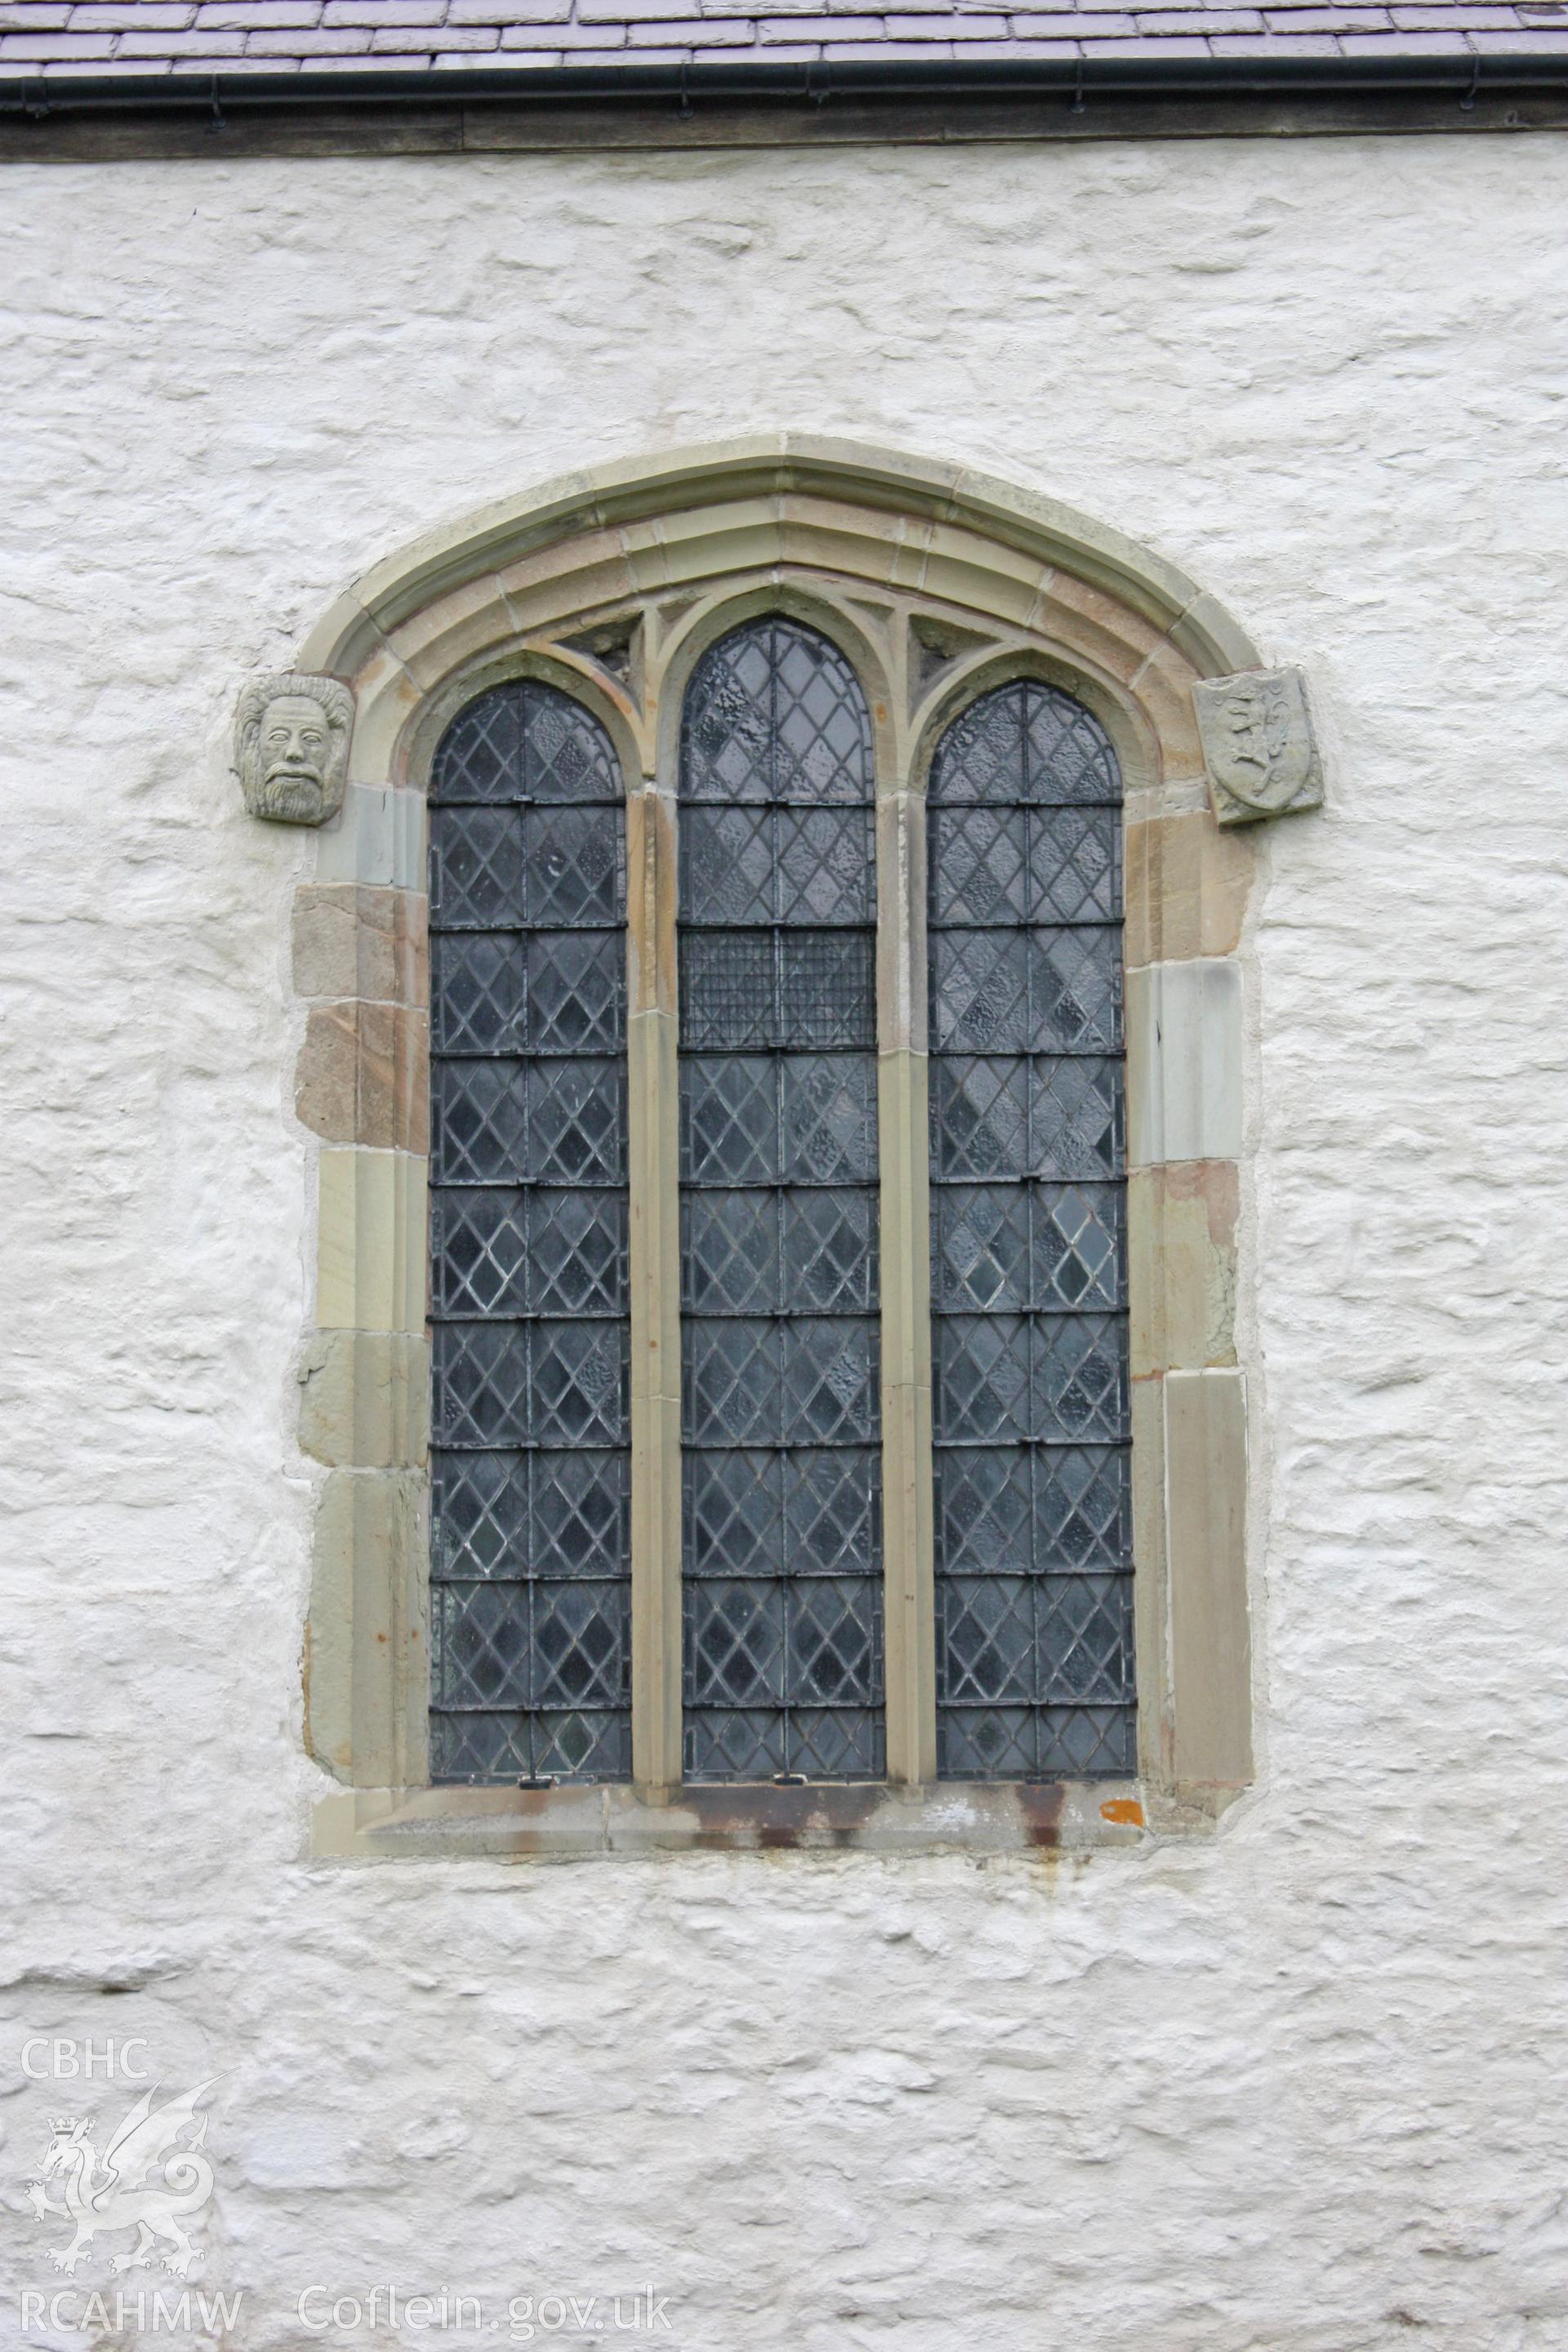 St Marcella's Church detail of south windows